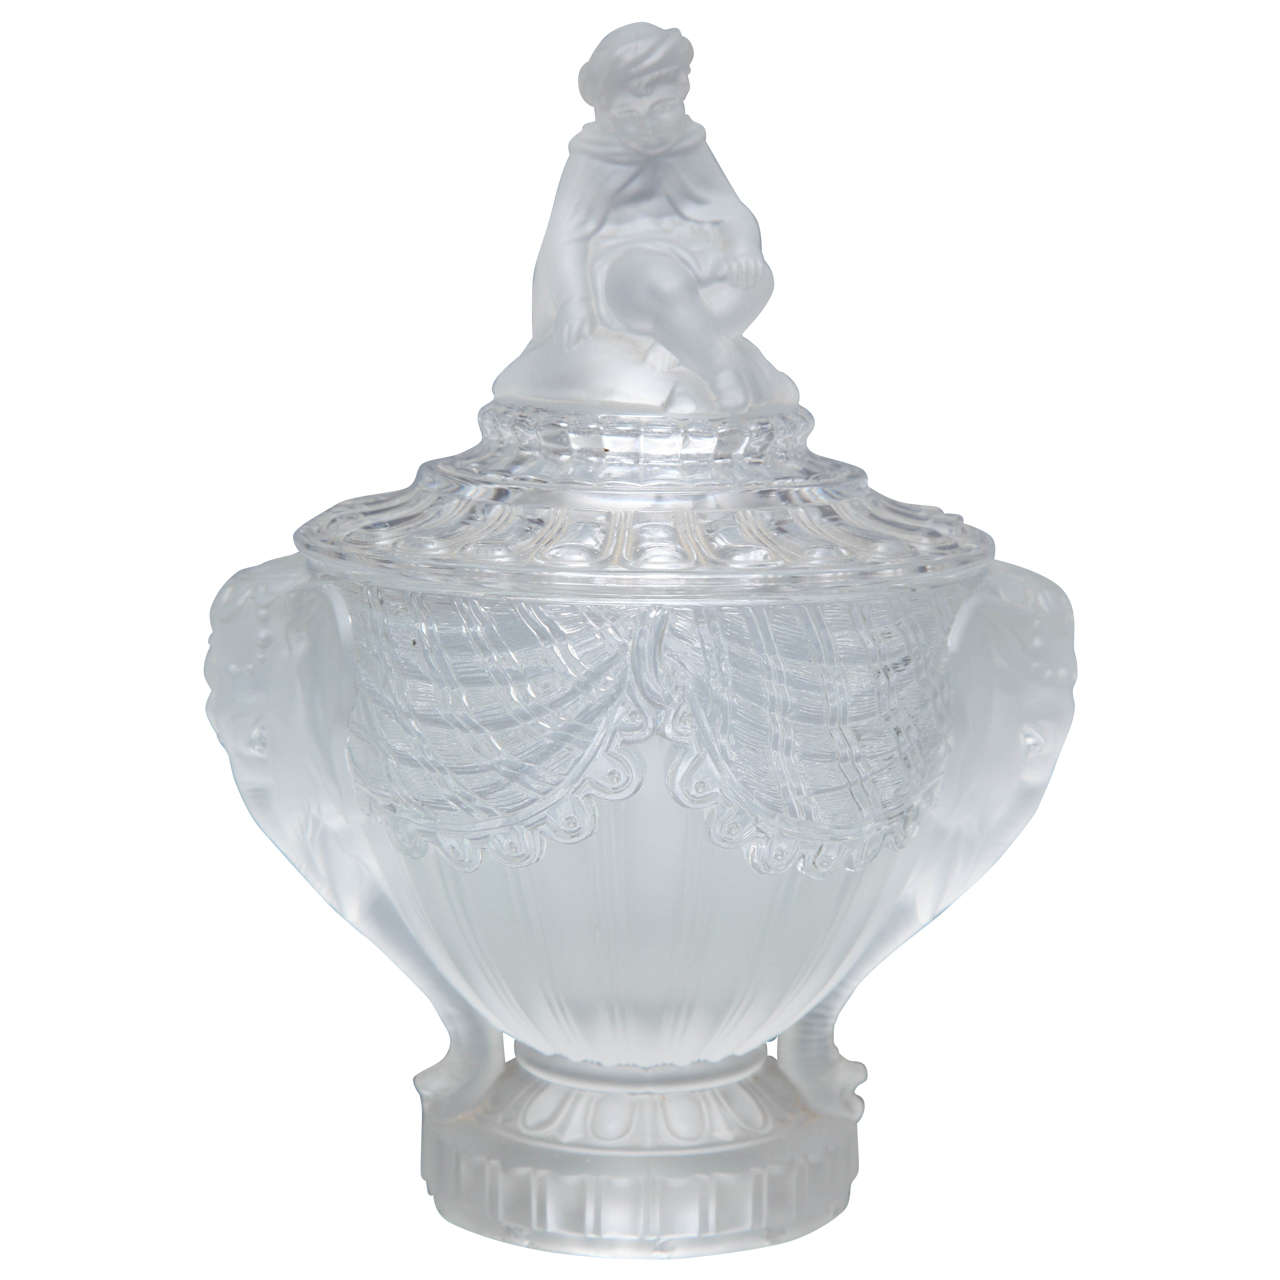 A Fine pair of orientalist French signed Baccarat candy covered compotes with elephant handles and an oriental figure at the apex. Crystal carved drapery spills down luxuriously from the lid of the compote while elephant's tusks help support the